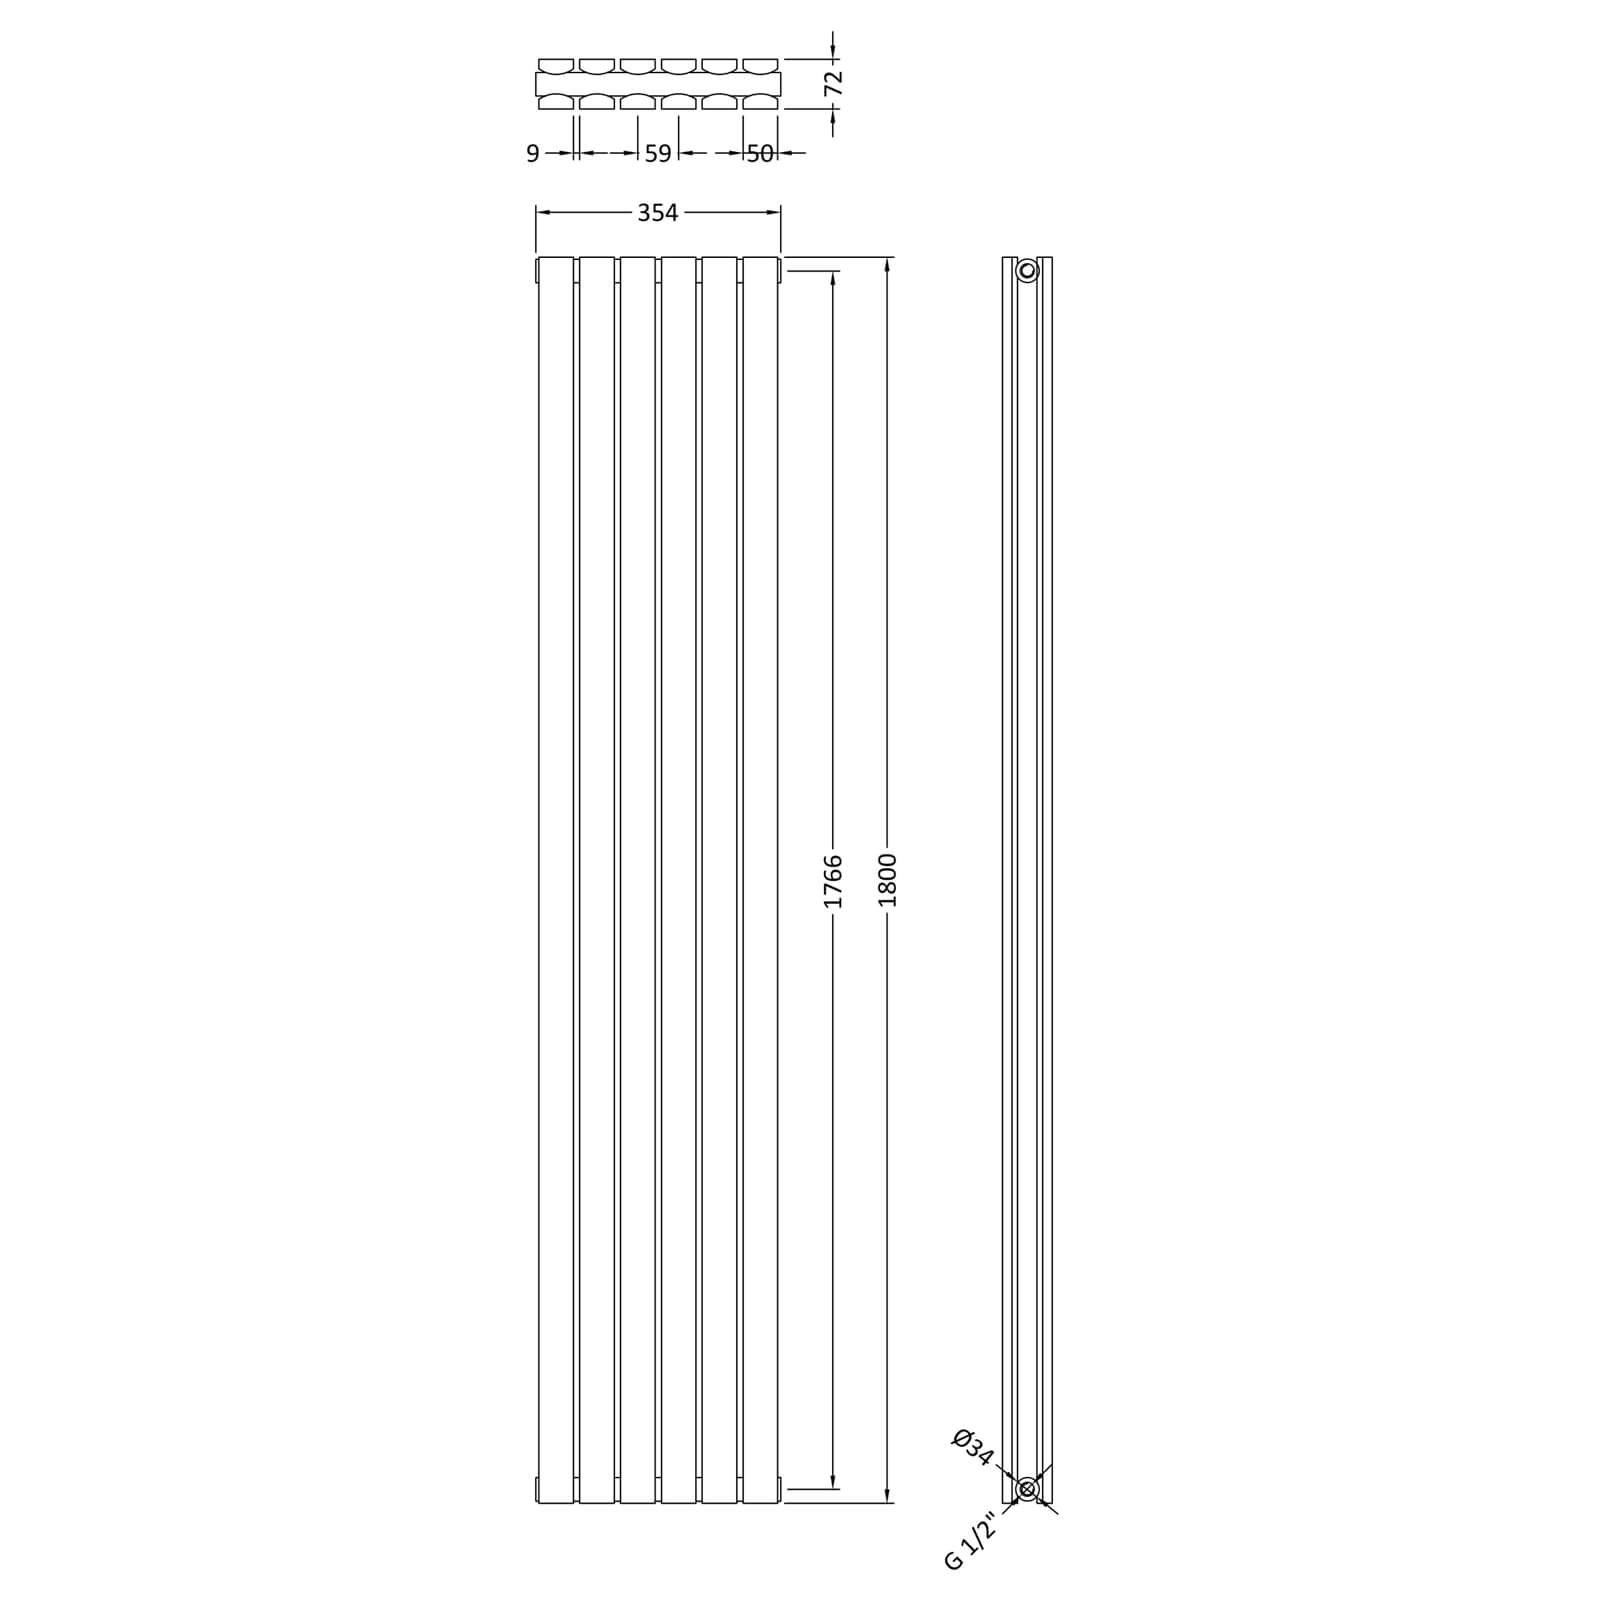 Balterley Lucia Double Panel Radiator - 1800 x 354mm - Anthracite